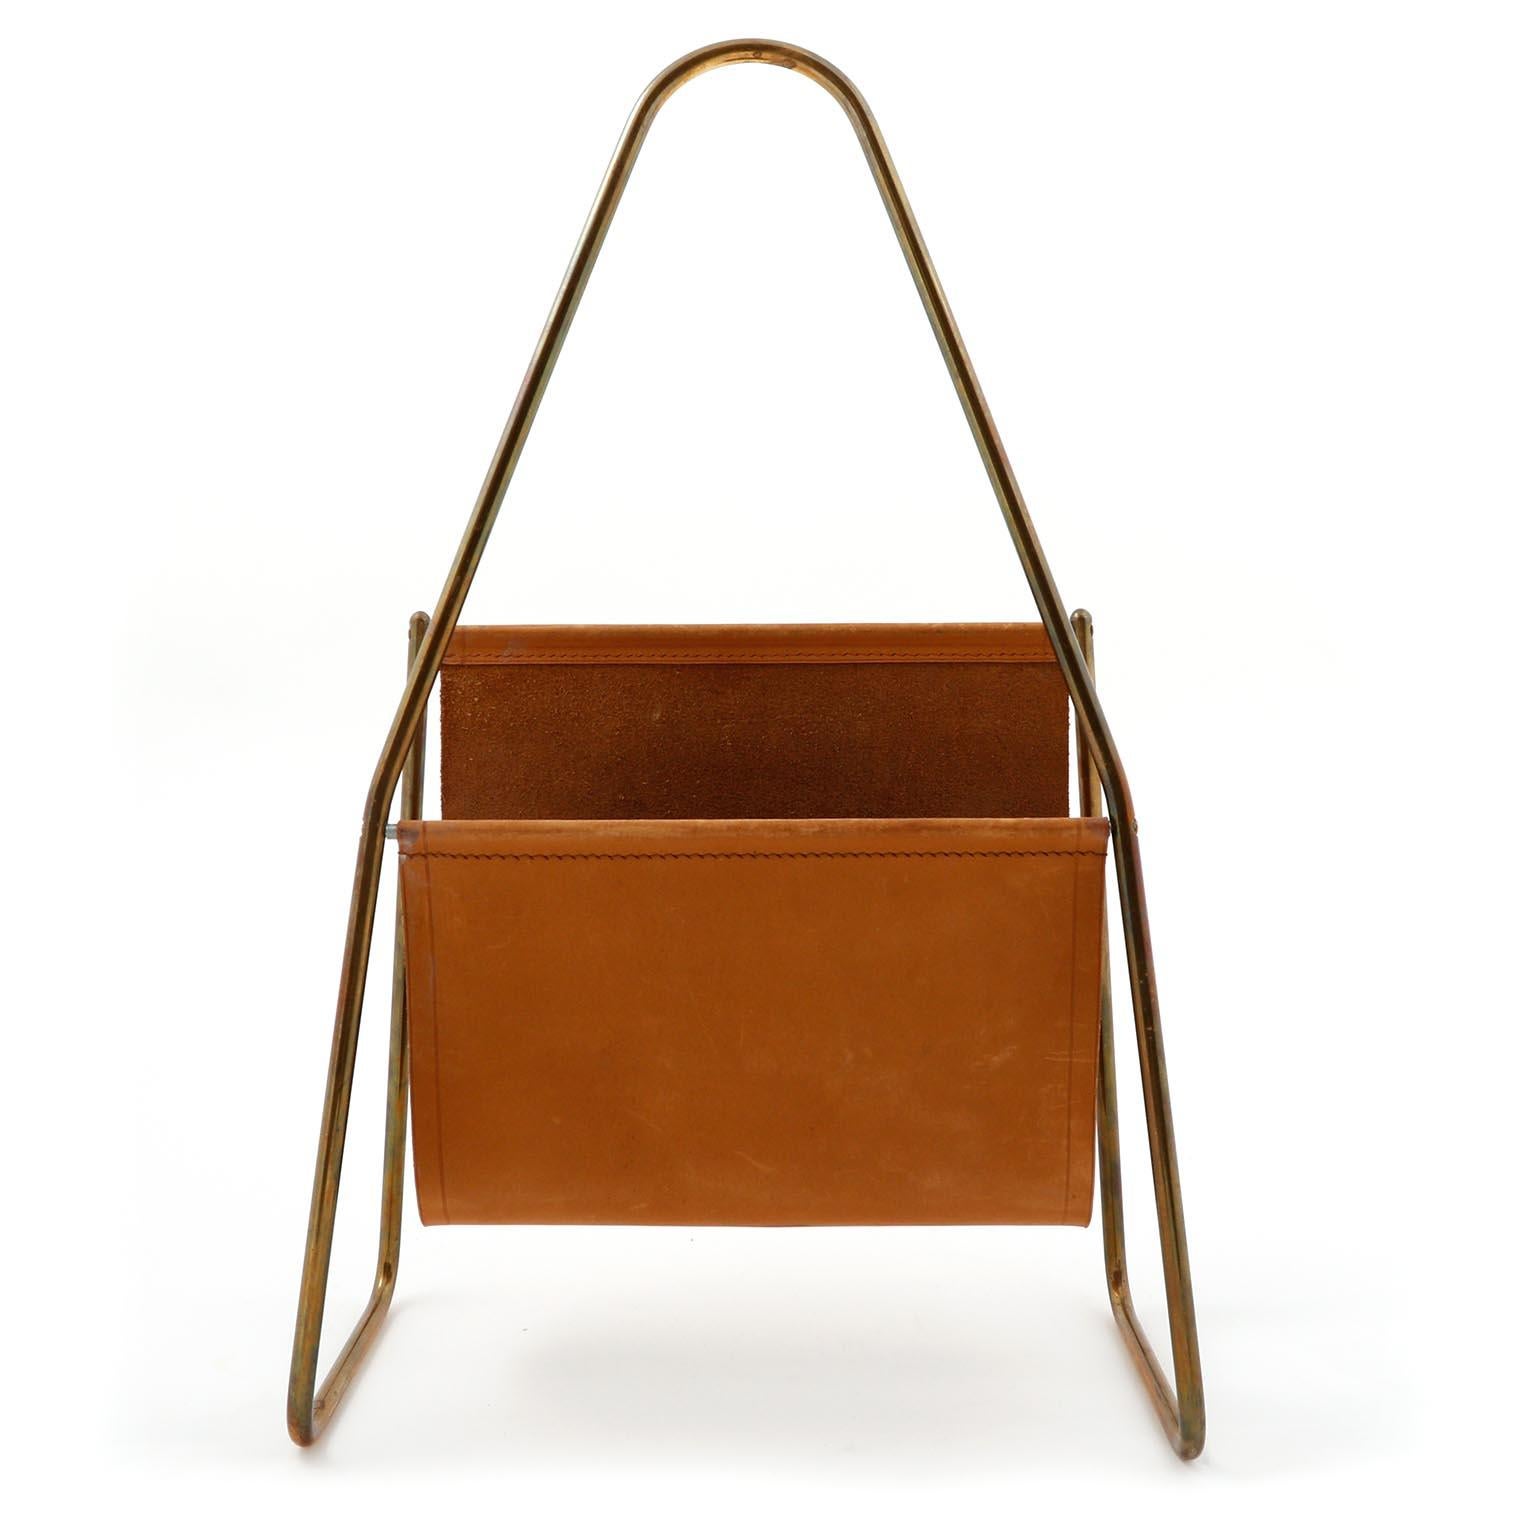 A magazine or newspaper tray made of patined brass and cognac or light brown leather designed by Carl Auböck, manufactured by Carl Auböck workshop in midcentury, circa 1950, Vienna, 1950s. 
An authentic handmade piece in very good original